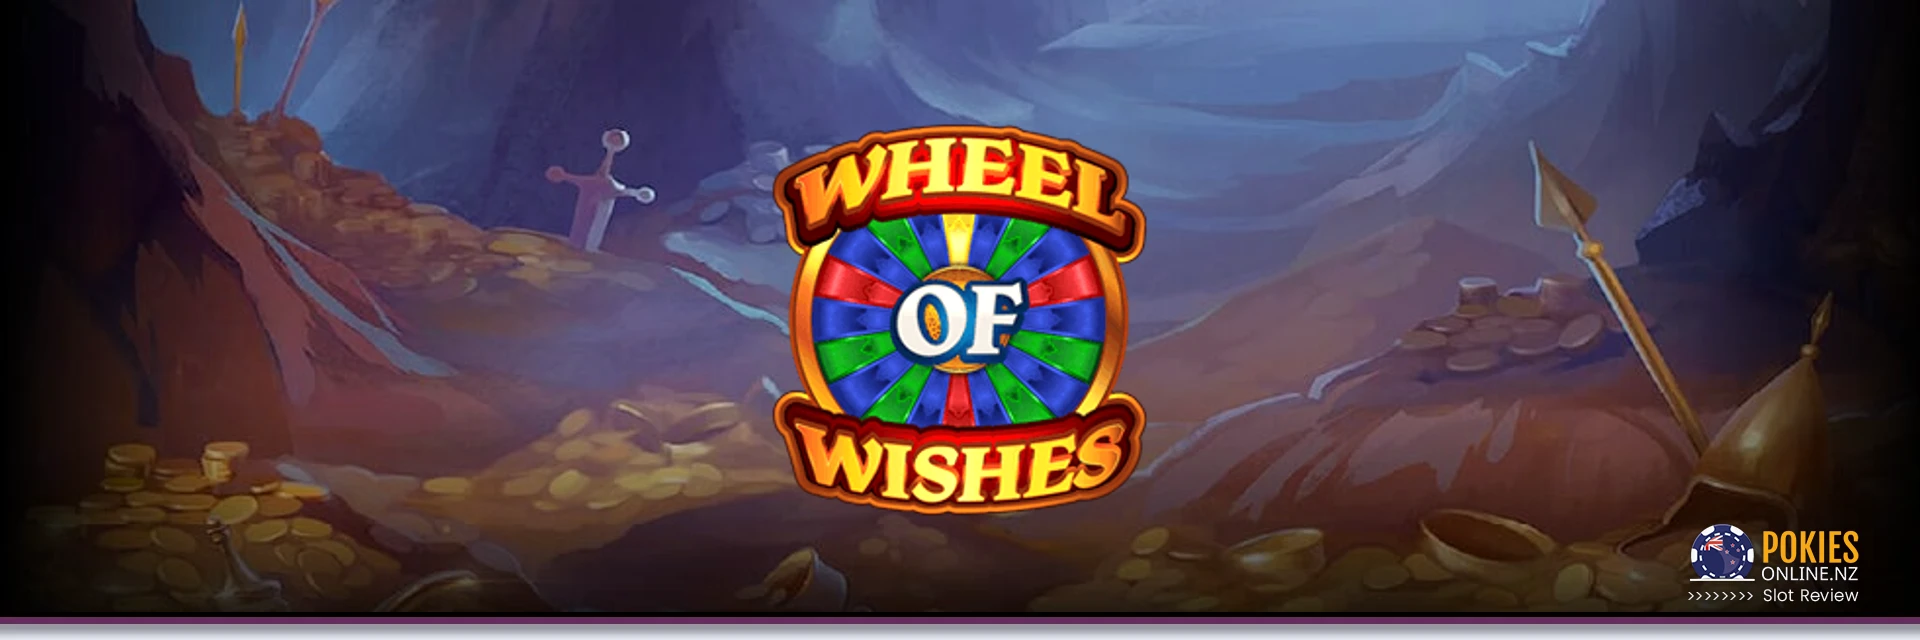 Wheel of Wishes Slot Banner